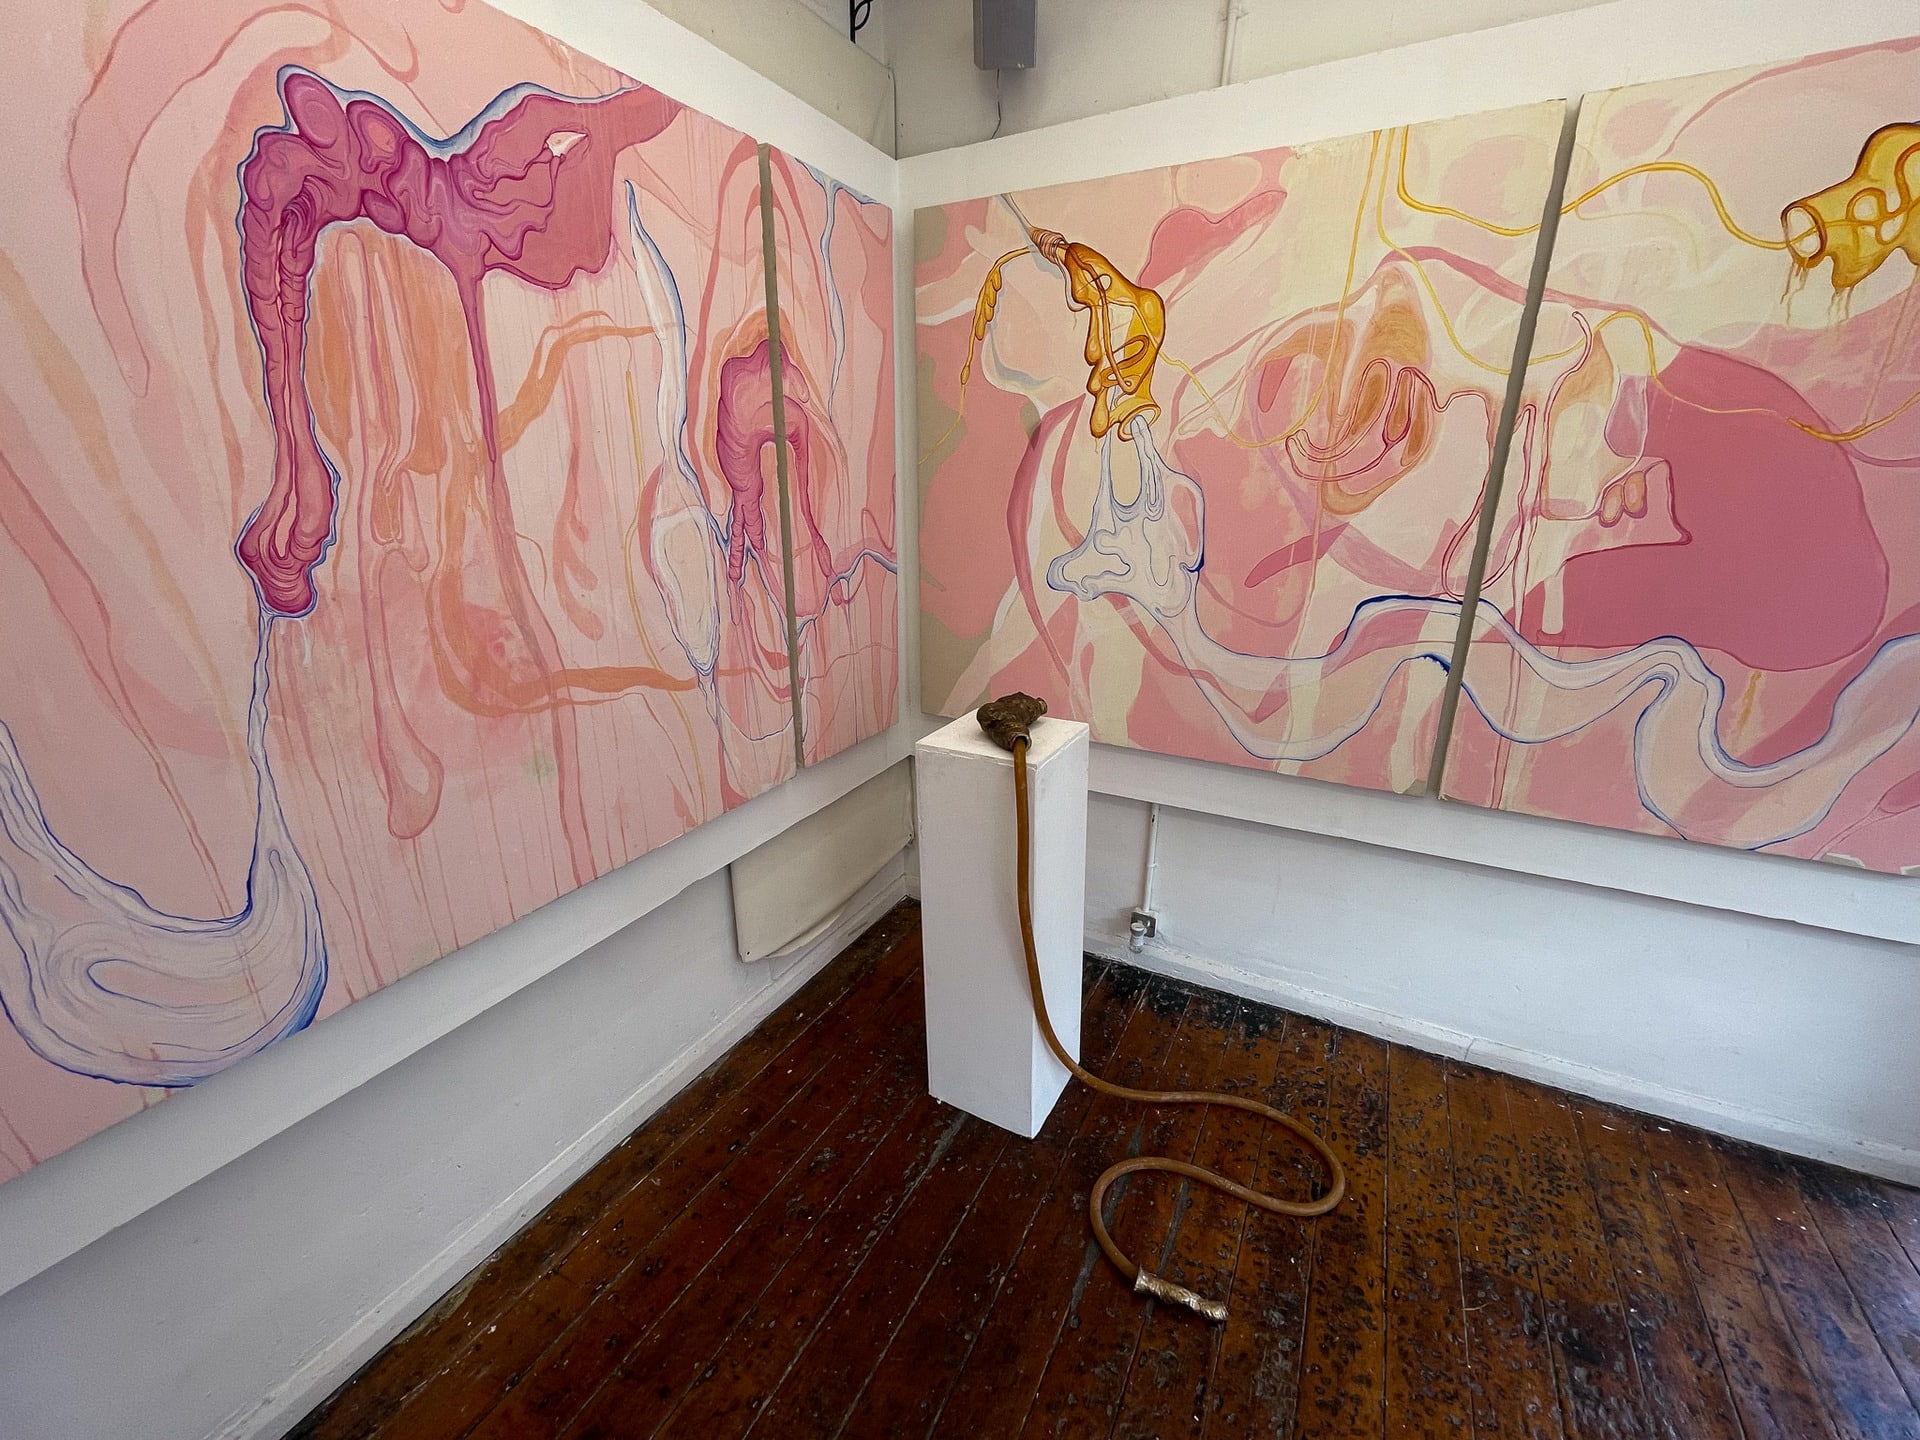 Wide perspective of two large pink paintings intersecting at corner and meeting with bronze sculpture